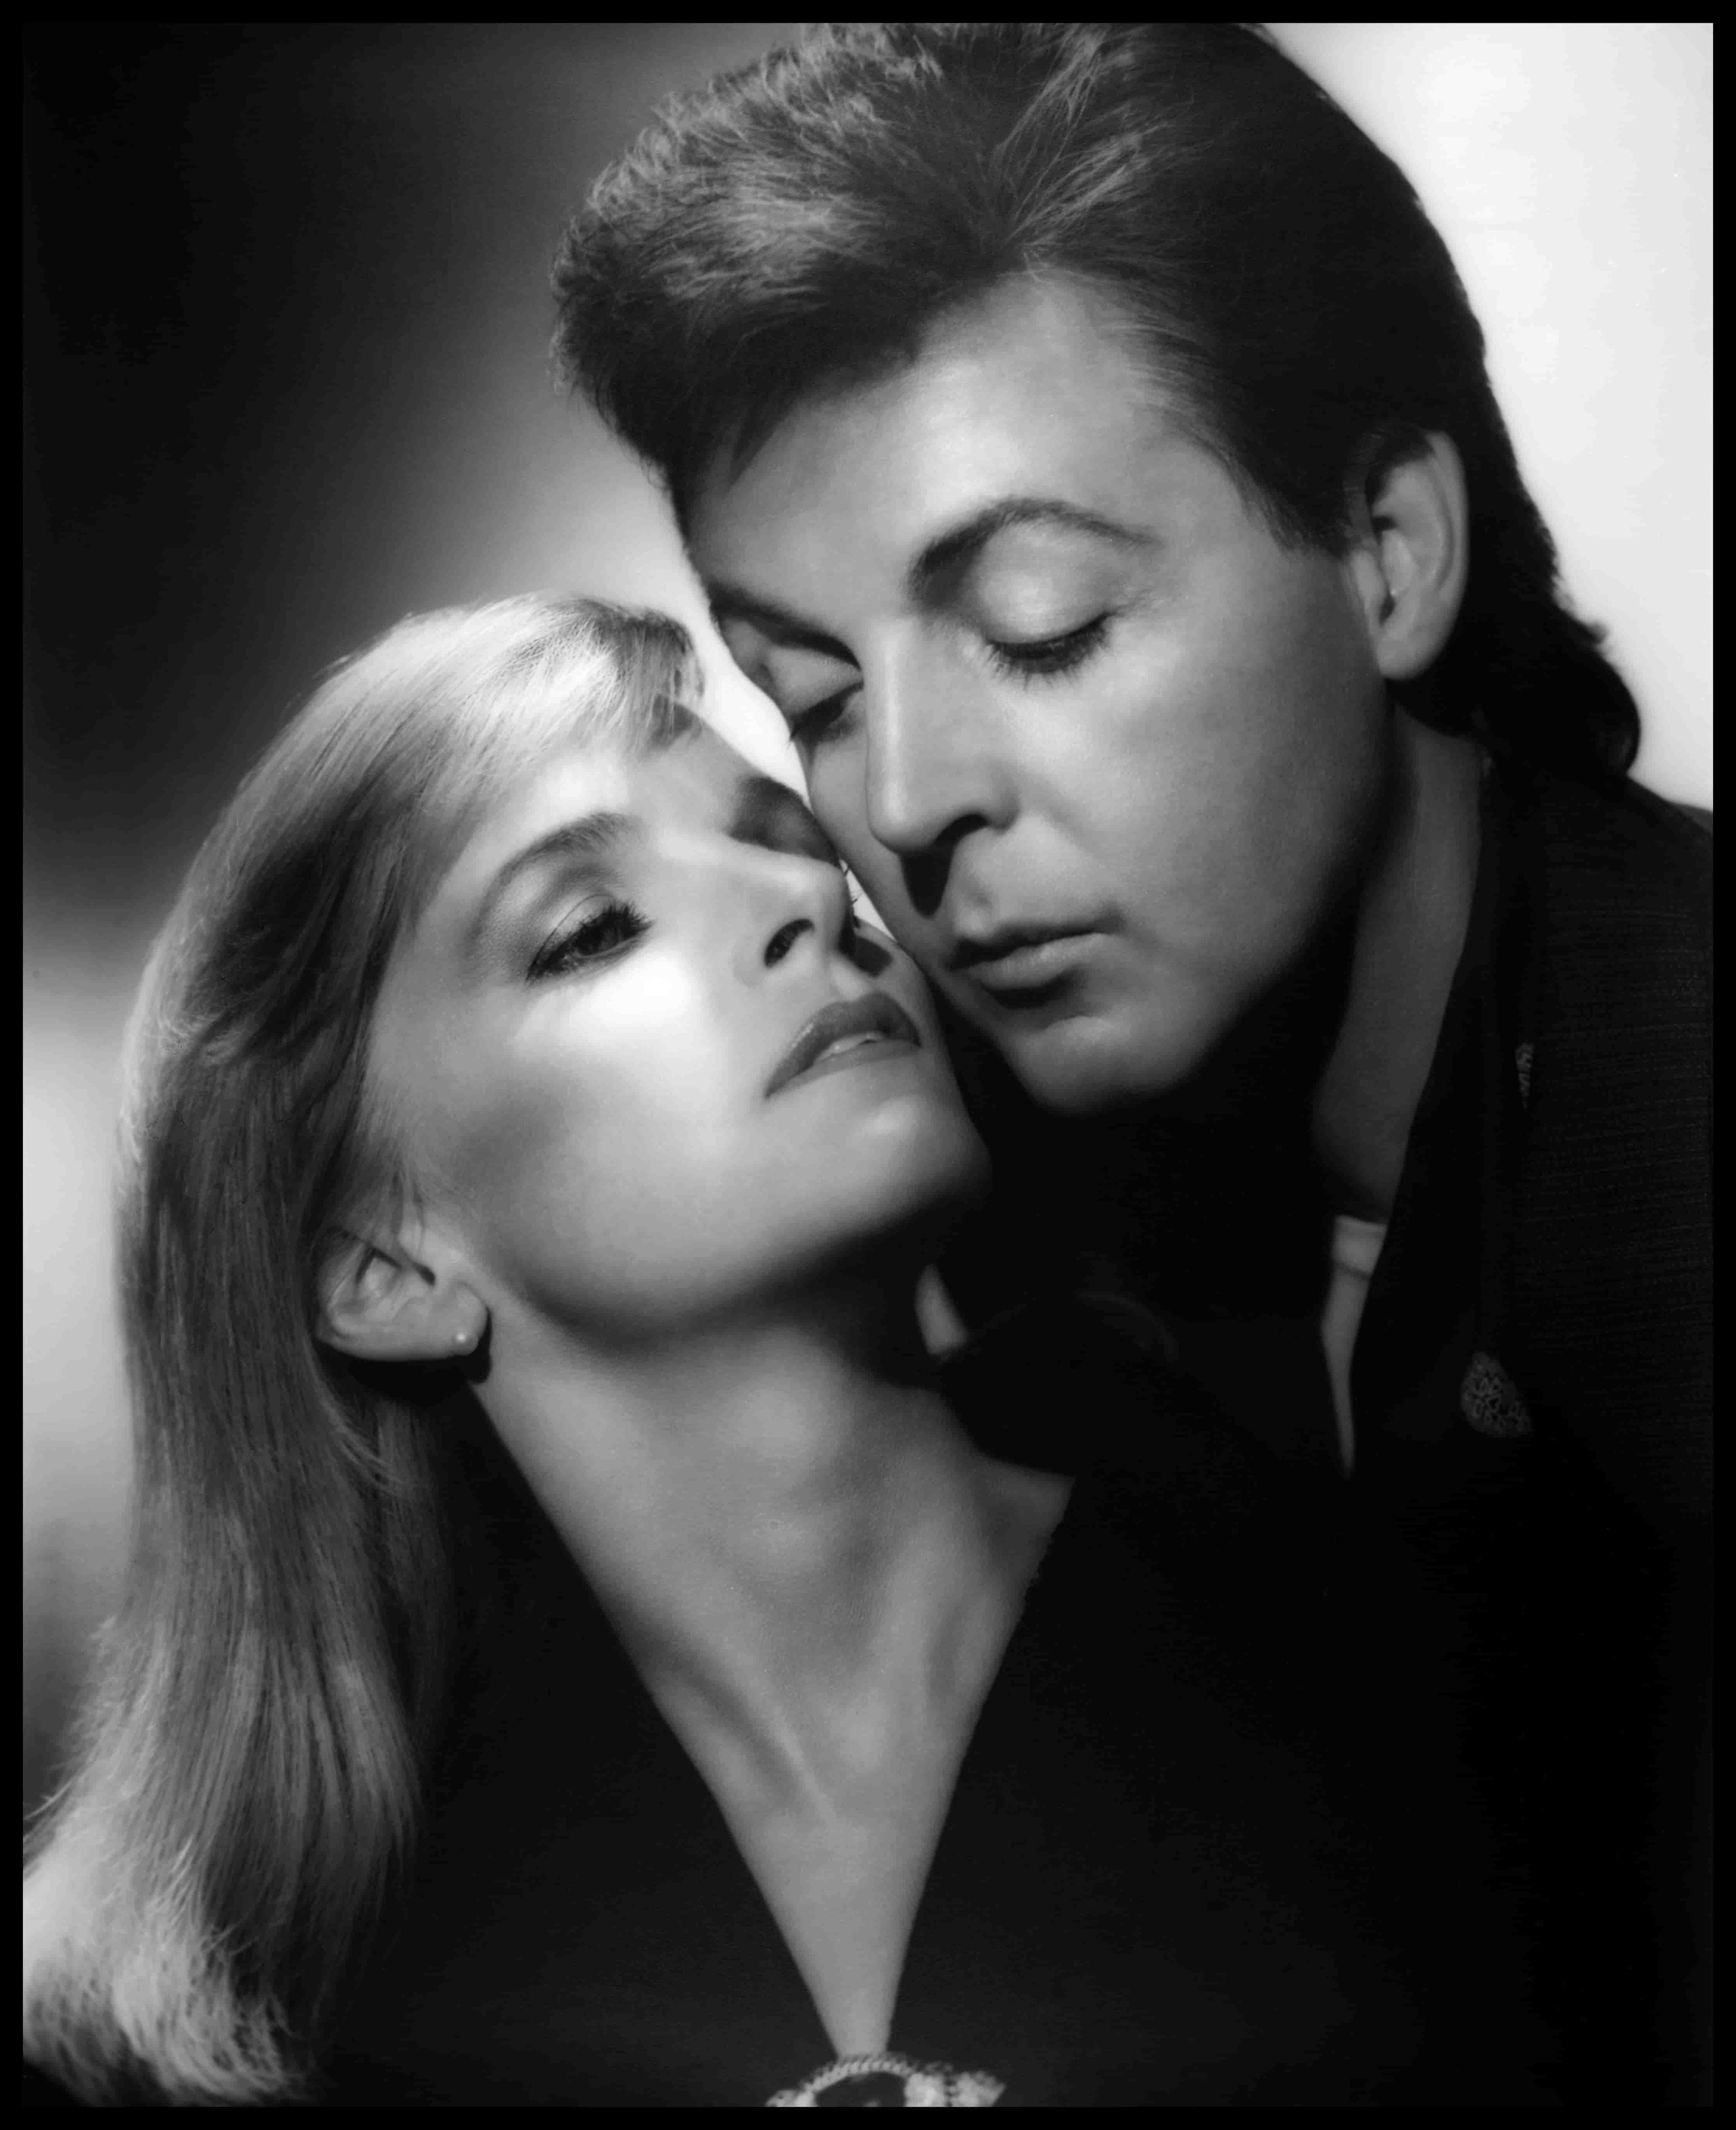 Photo of Paul and Linda by George Hurrell, used on the 'Press To Play' album cover